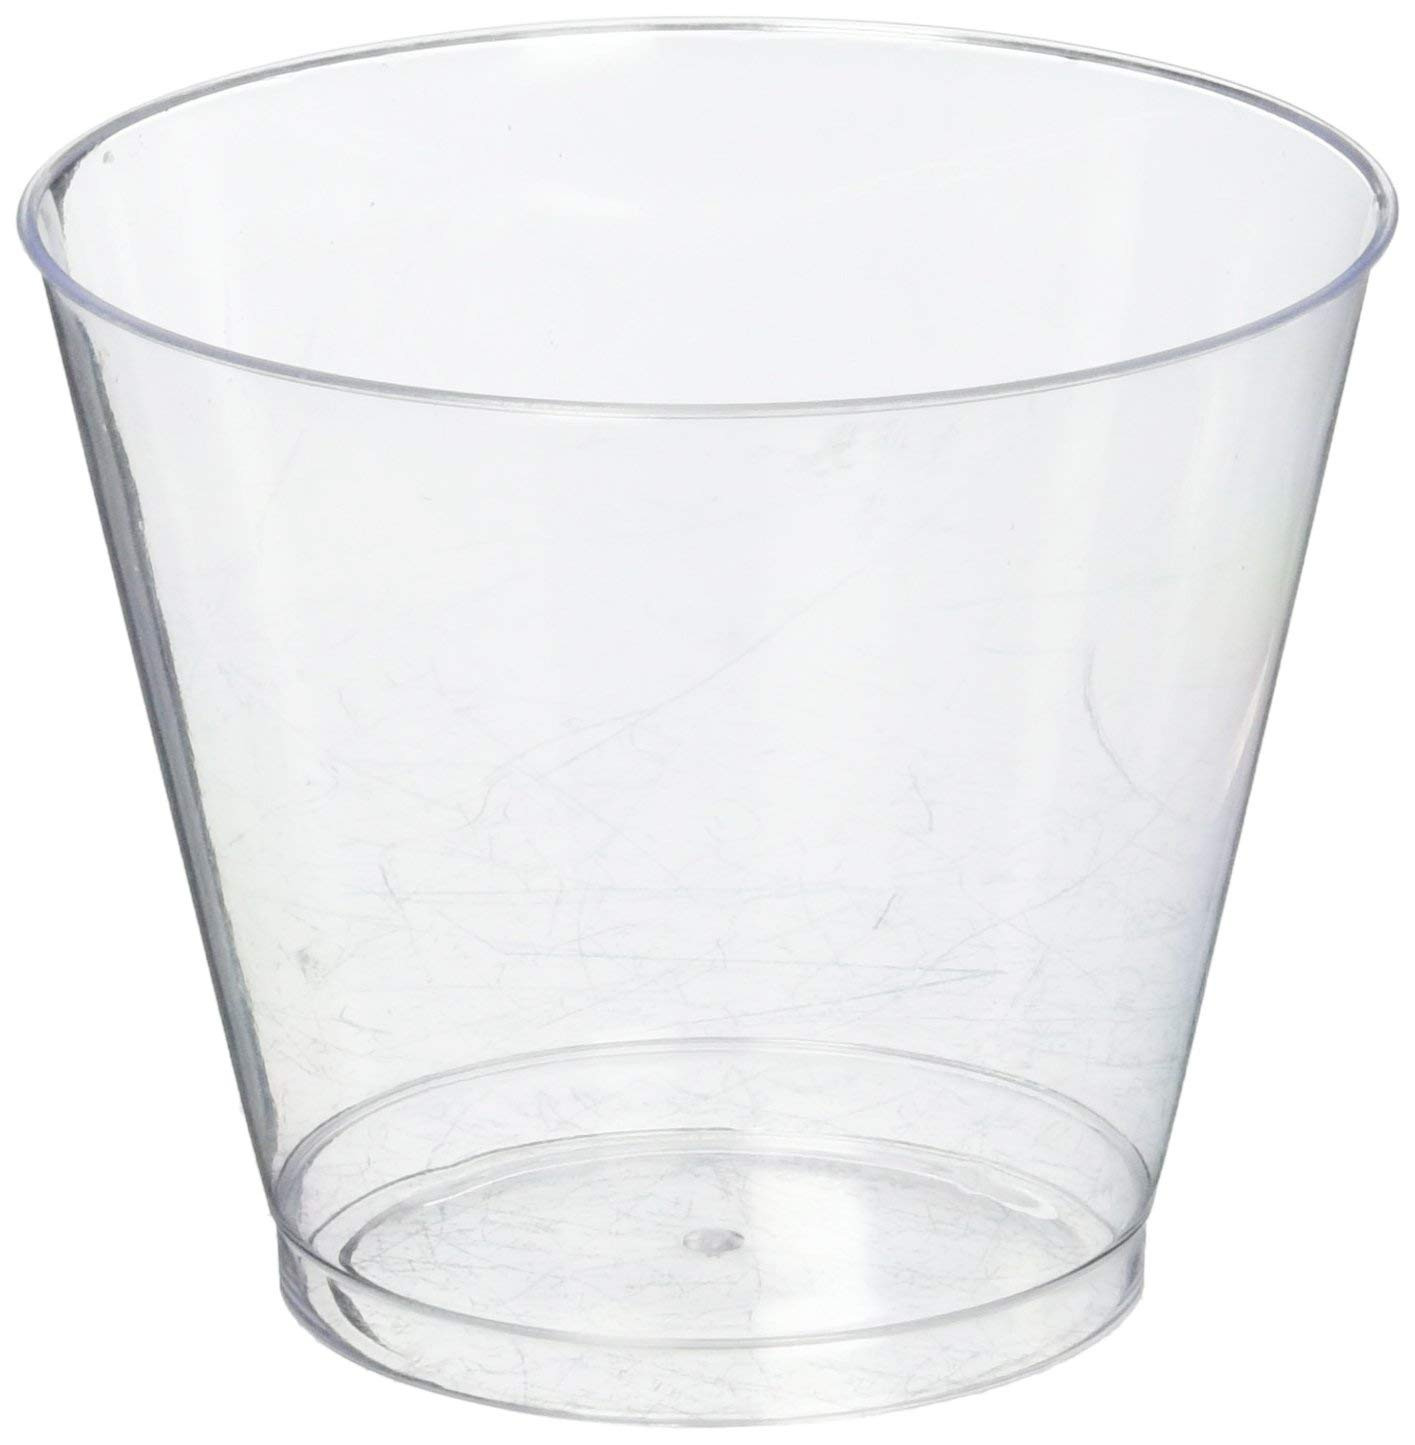 17 Trendy 10 Inch Glass Cylinder Vase Bulk 2024 free download 10 inch glass cylinder vase bulk of amazon com hard plastic tumblers 9 oz party cups old fashioned inside amazon com hard plastic tumblers 9 oz party cups old fashioned glass 100 count drink